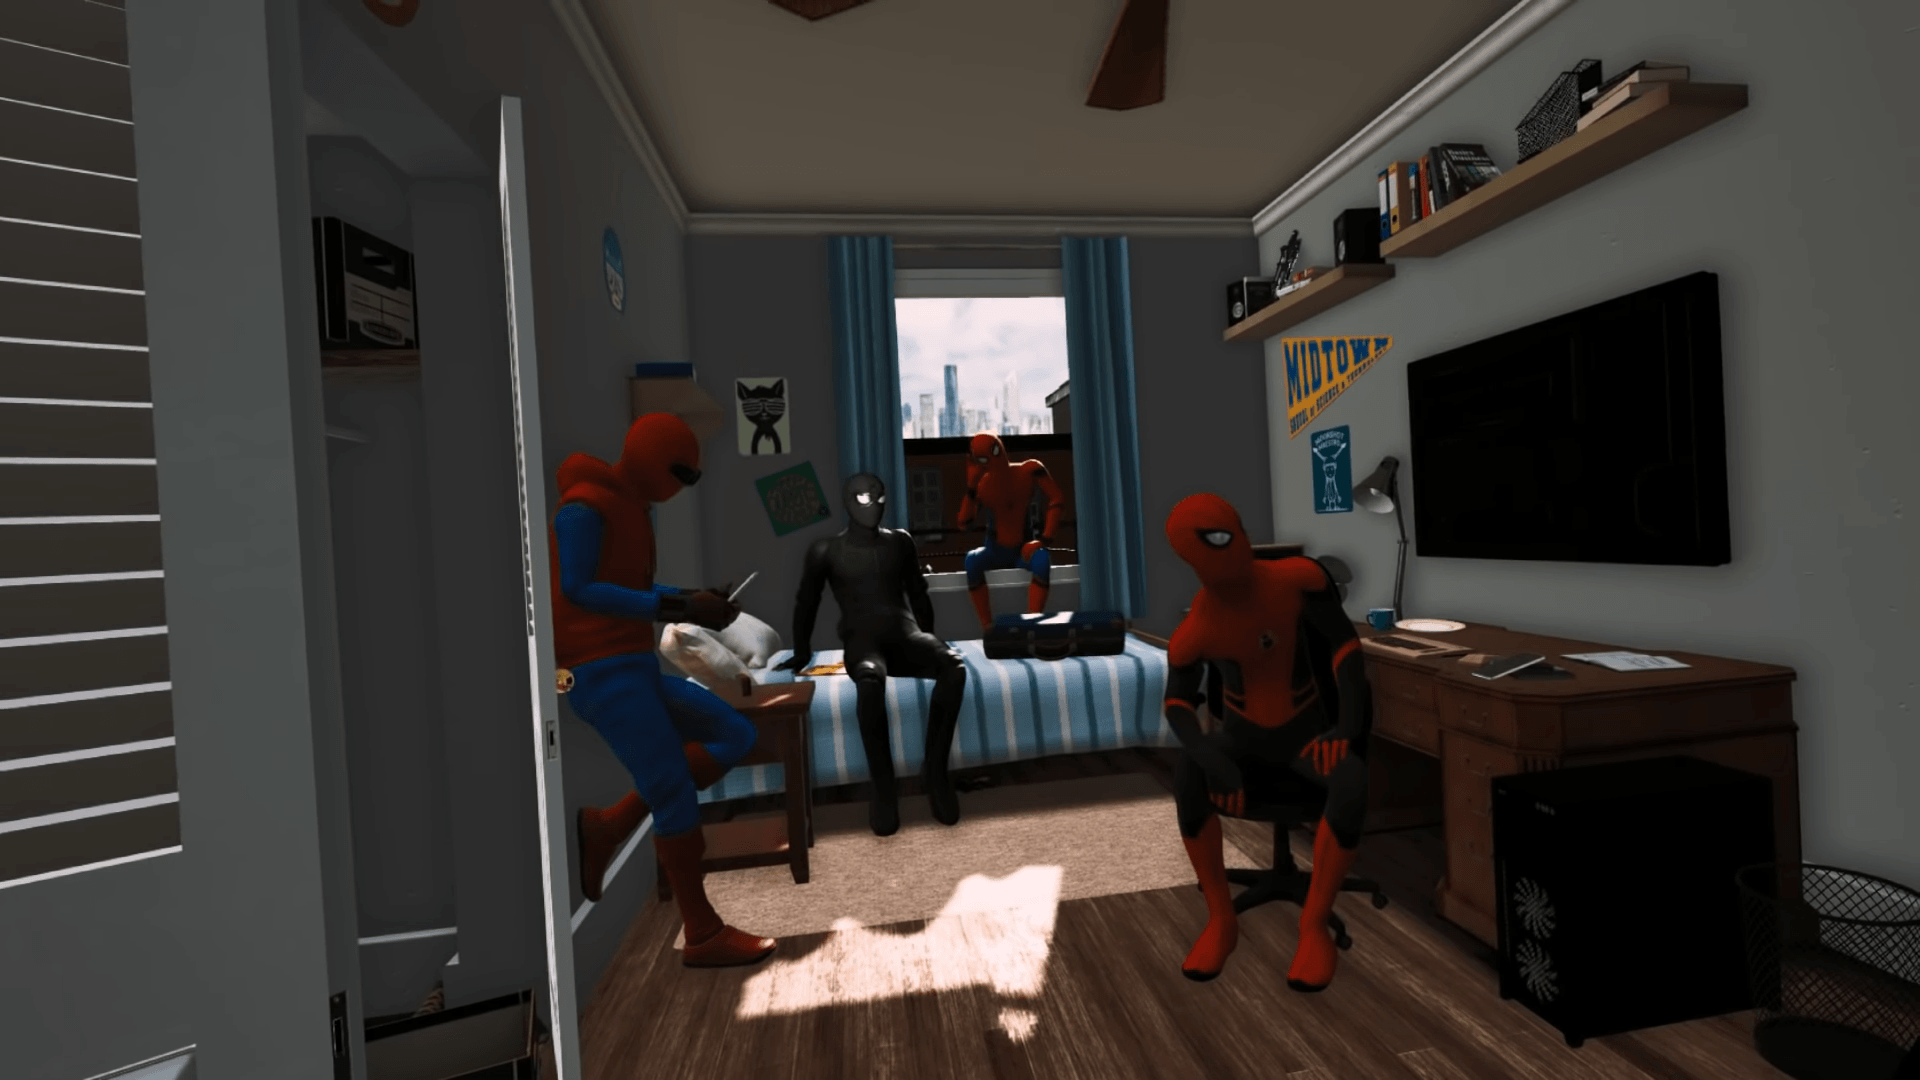 spider man vr far from home